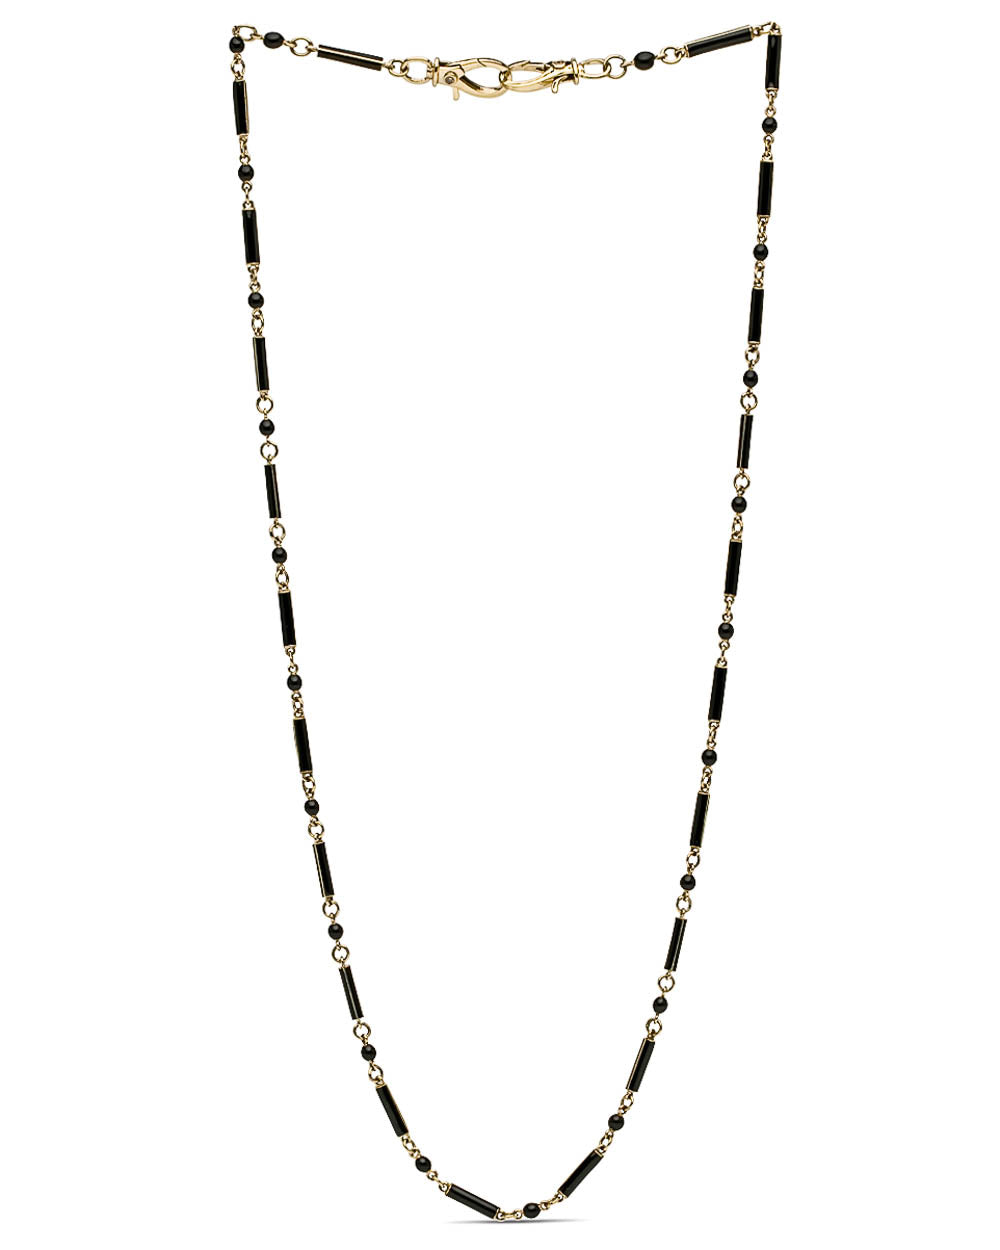 Black Enamel and Diamond Long Chain Link Necklace